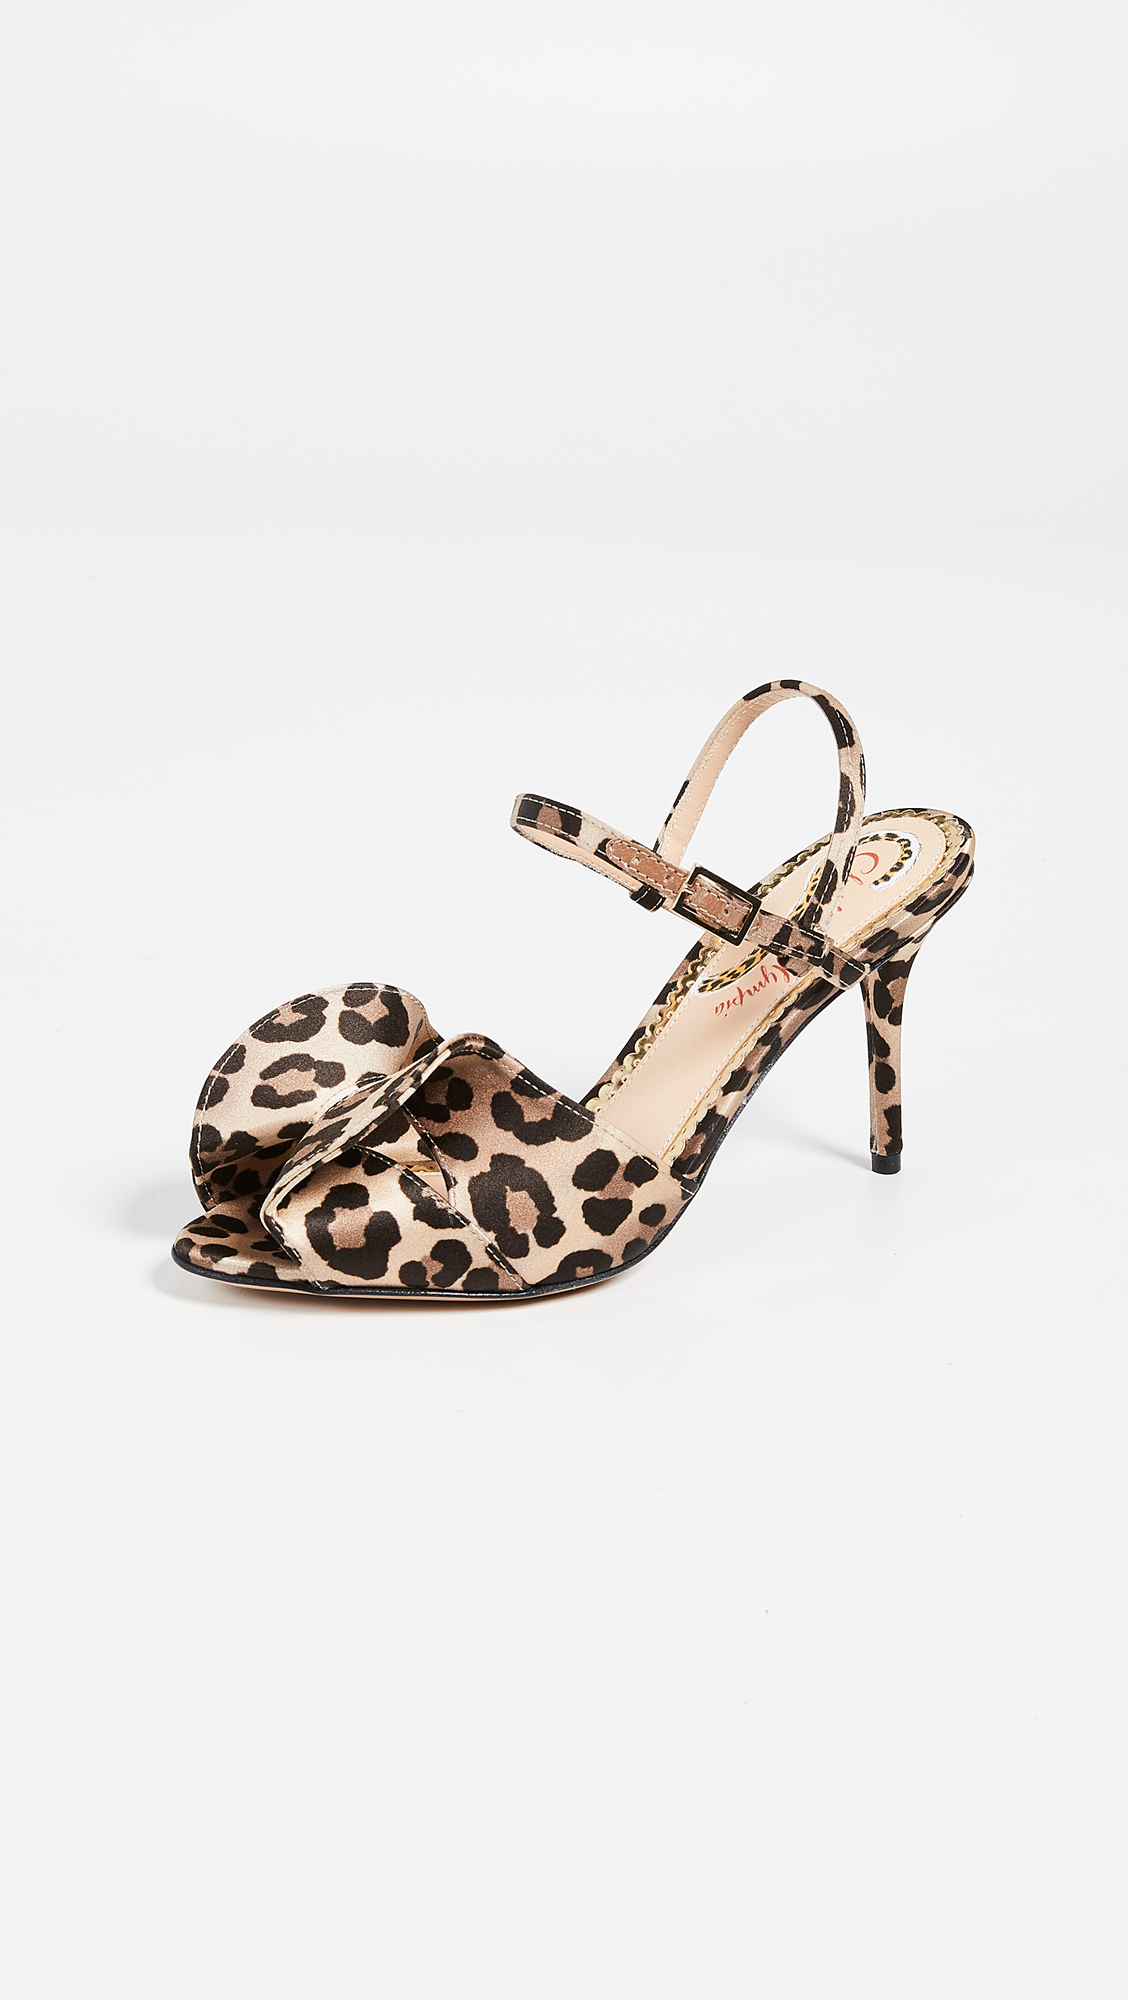 Leopard Print with Bow Stiletto